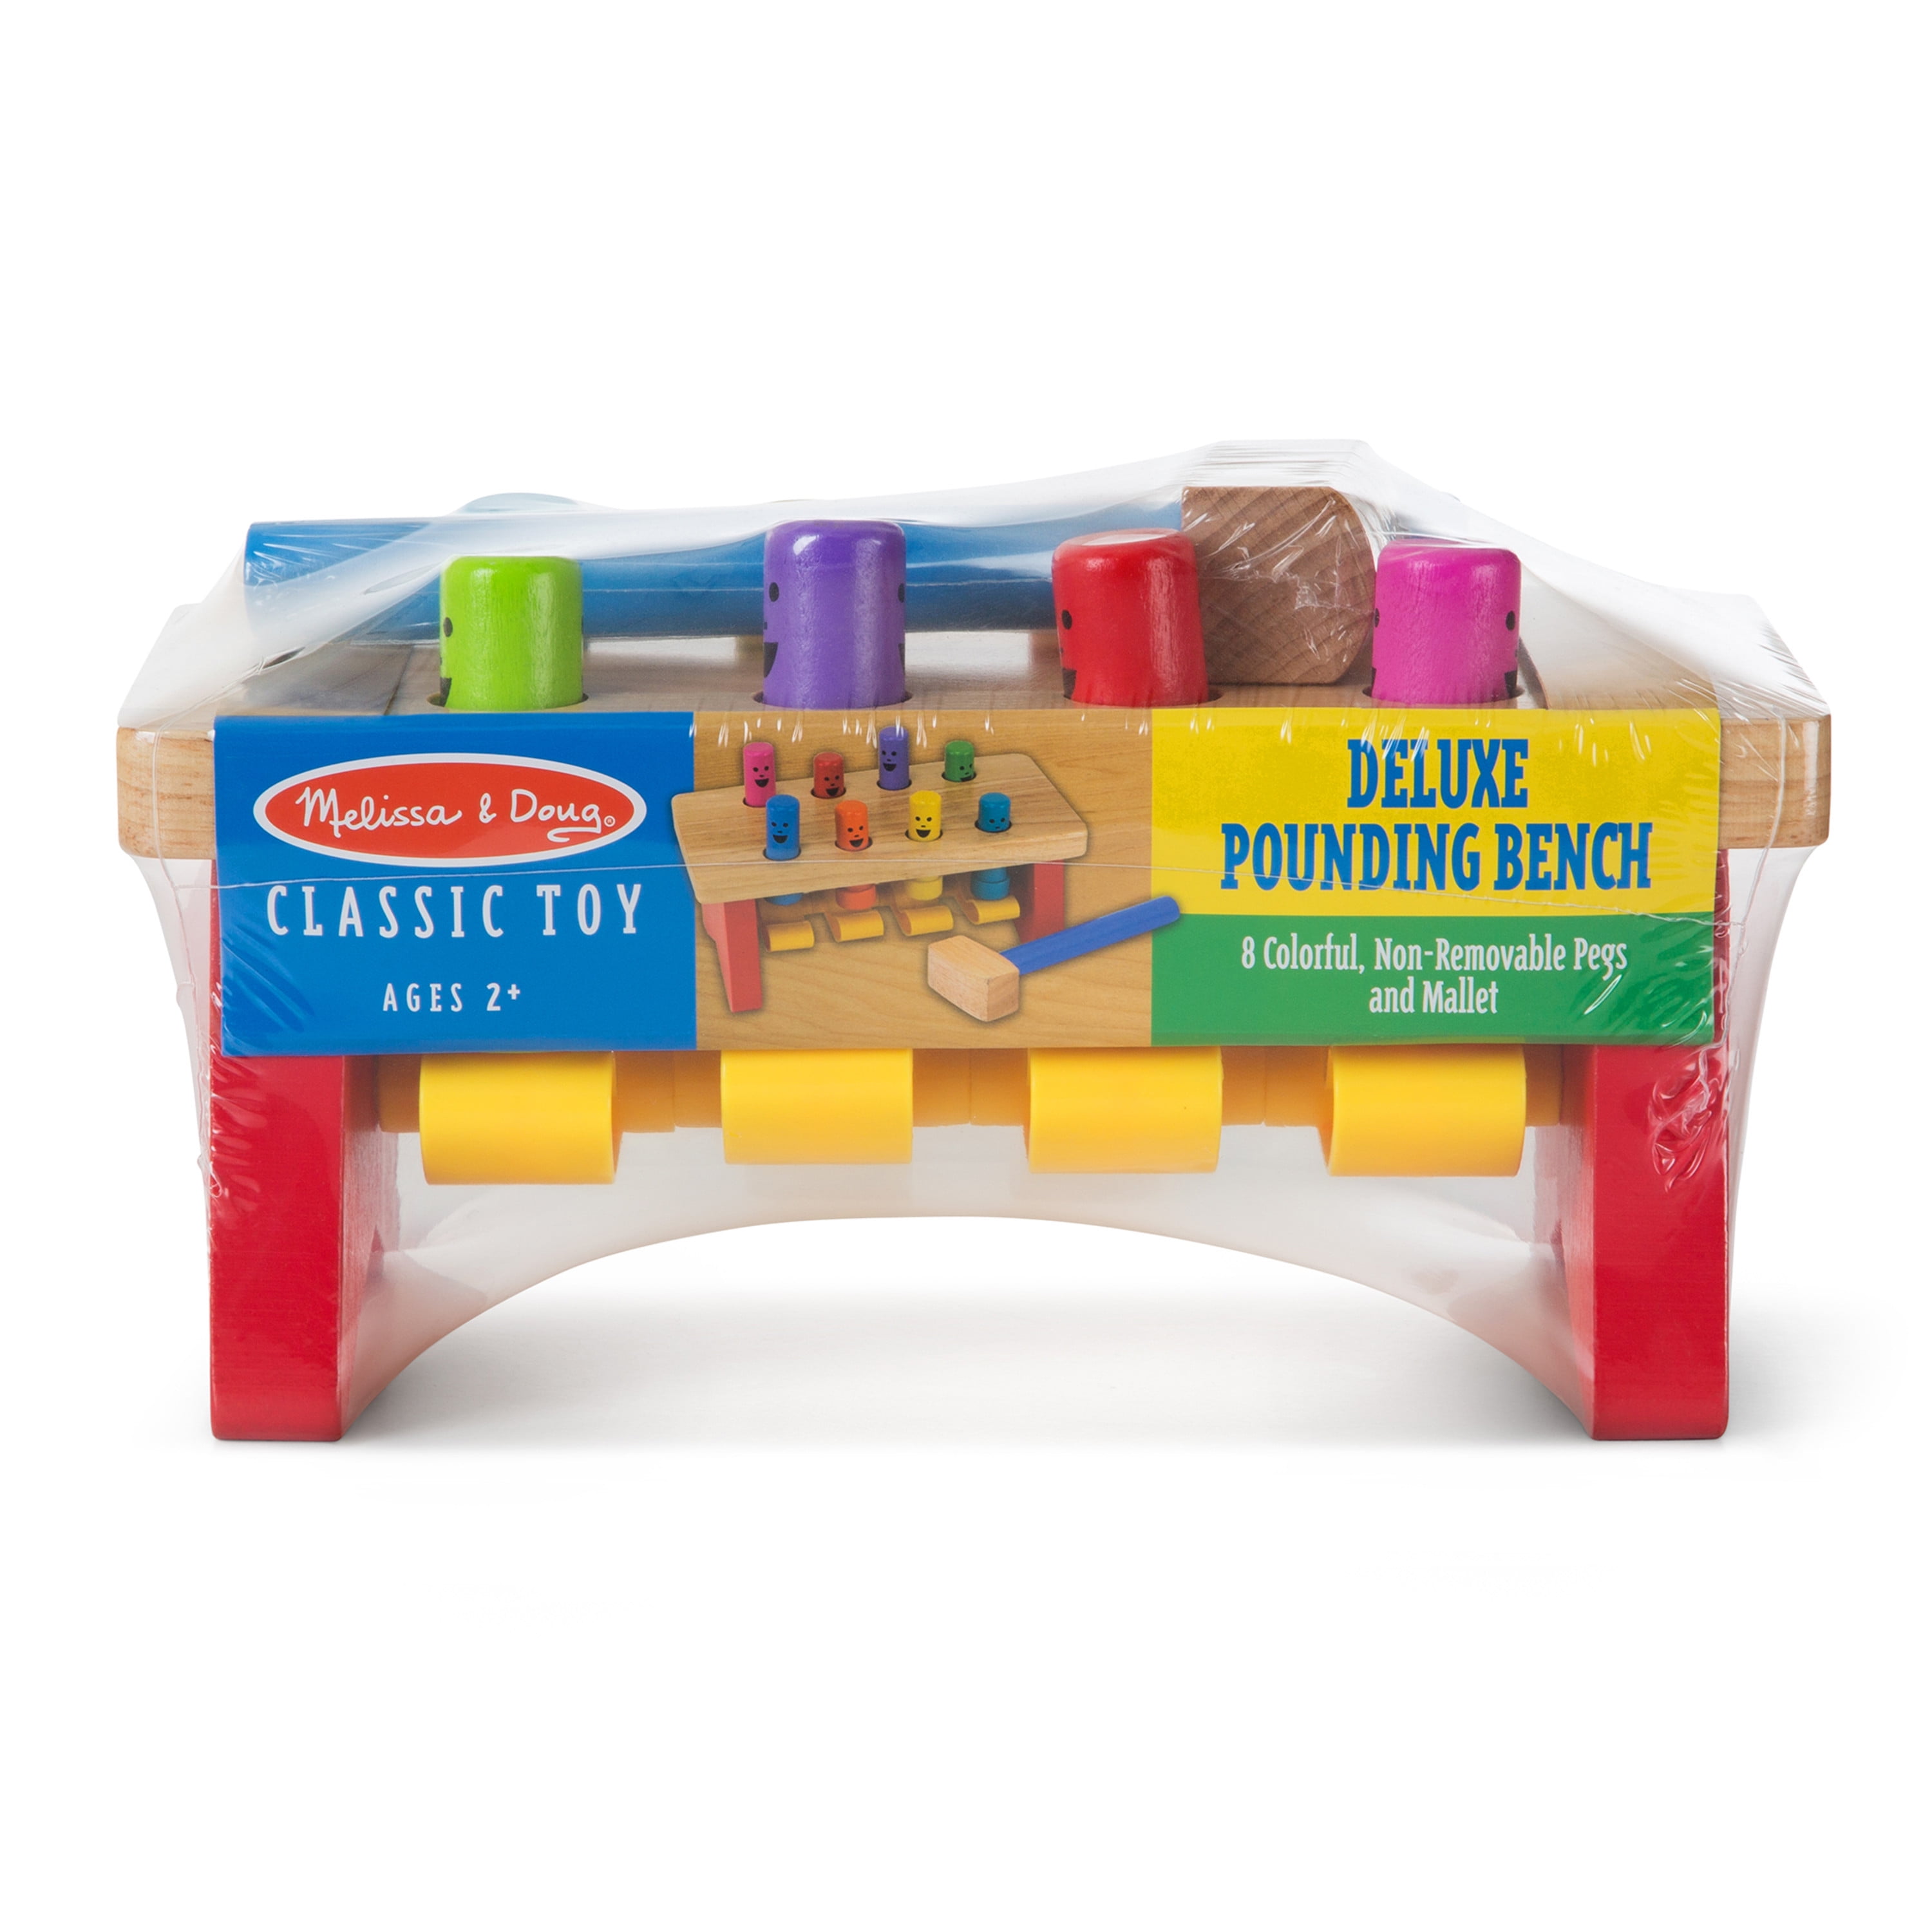 Melissa & Doug 14490 Deluxe Pounding Bench Wooden Toy with Mallet for sale online 